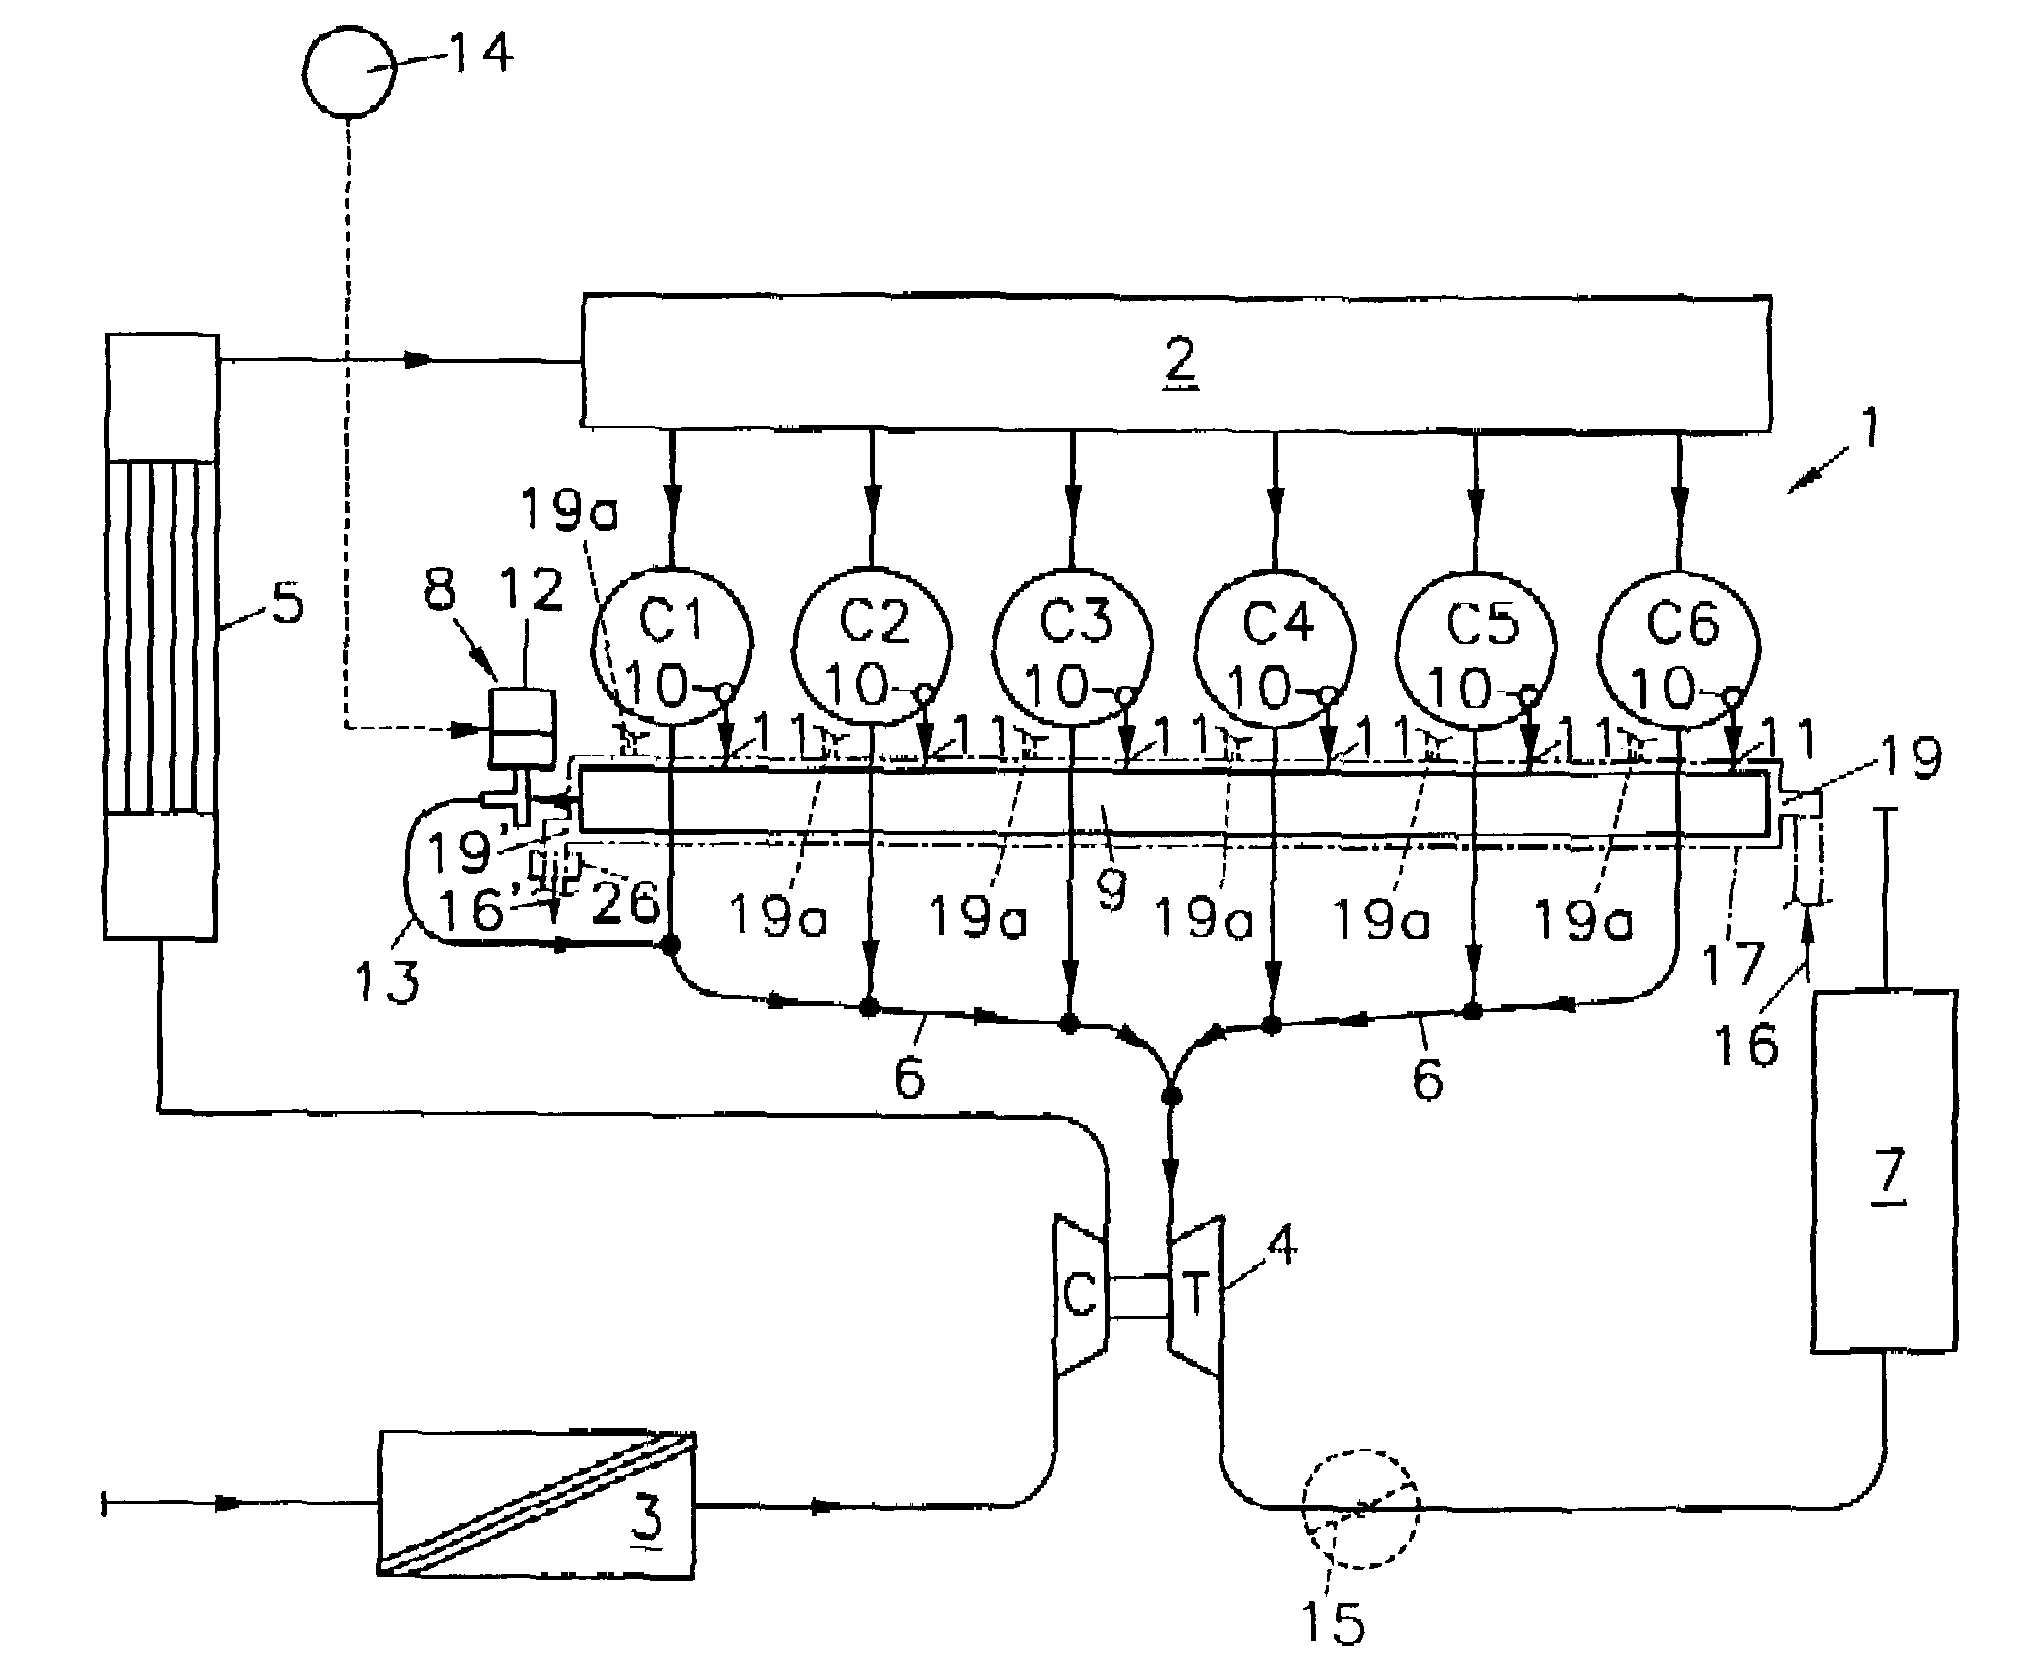 Engine brake system of a multicylinder internal combustion engine comprising a cooled intermediate pipe for exchanging gas between cylinders during engine braking